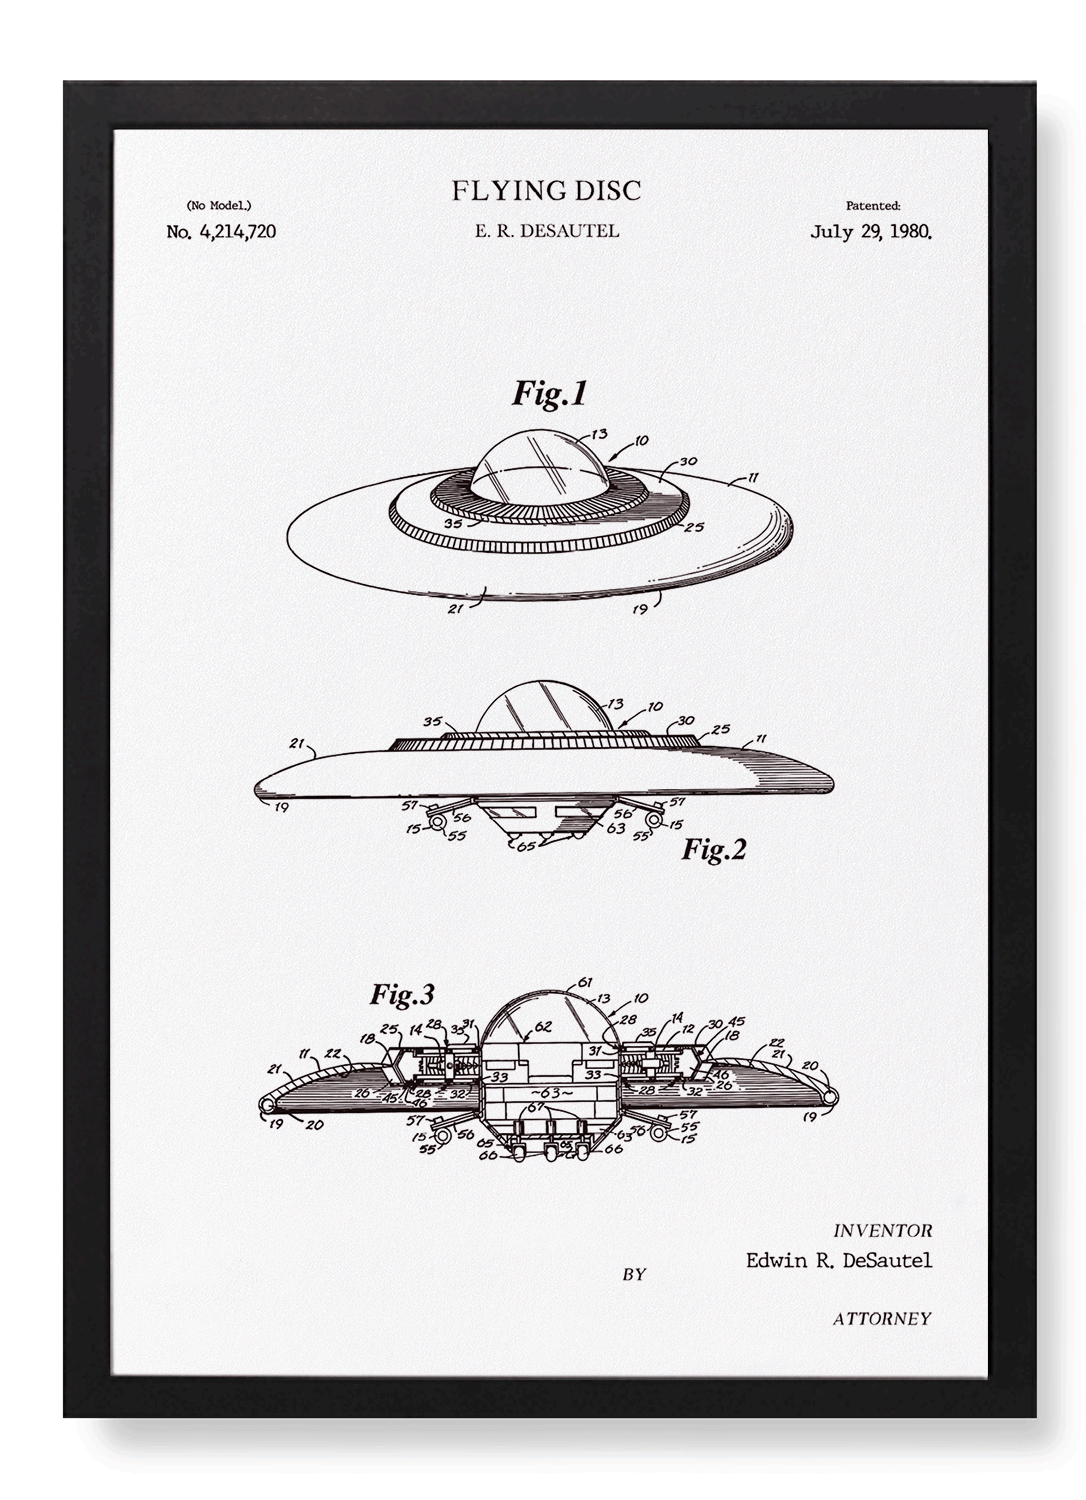 PATENT OF FLYING DISC (1980)